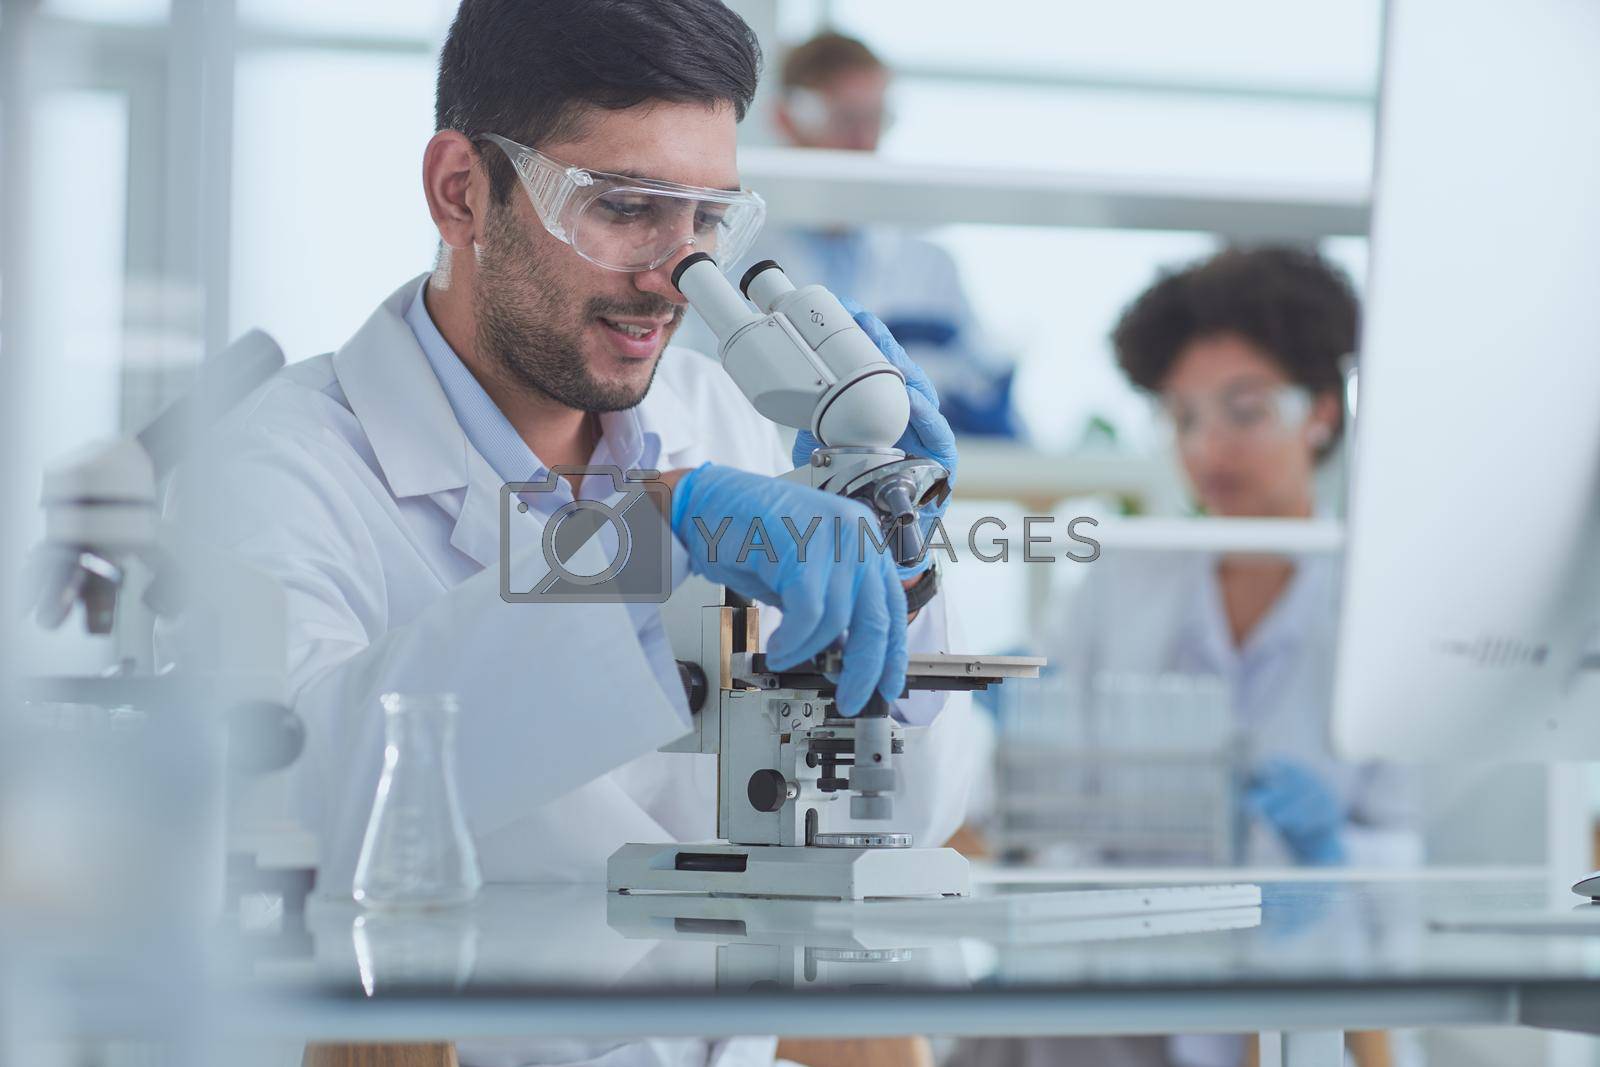 Royalty free image of Team of Medical Research Scientists Working on Generation Experimental Drug by asdf